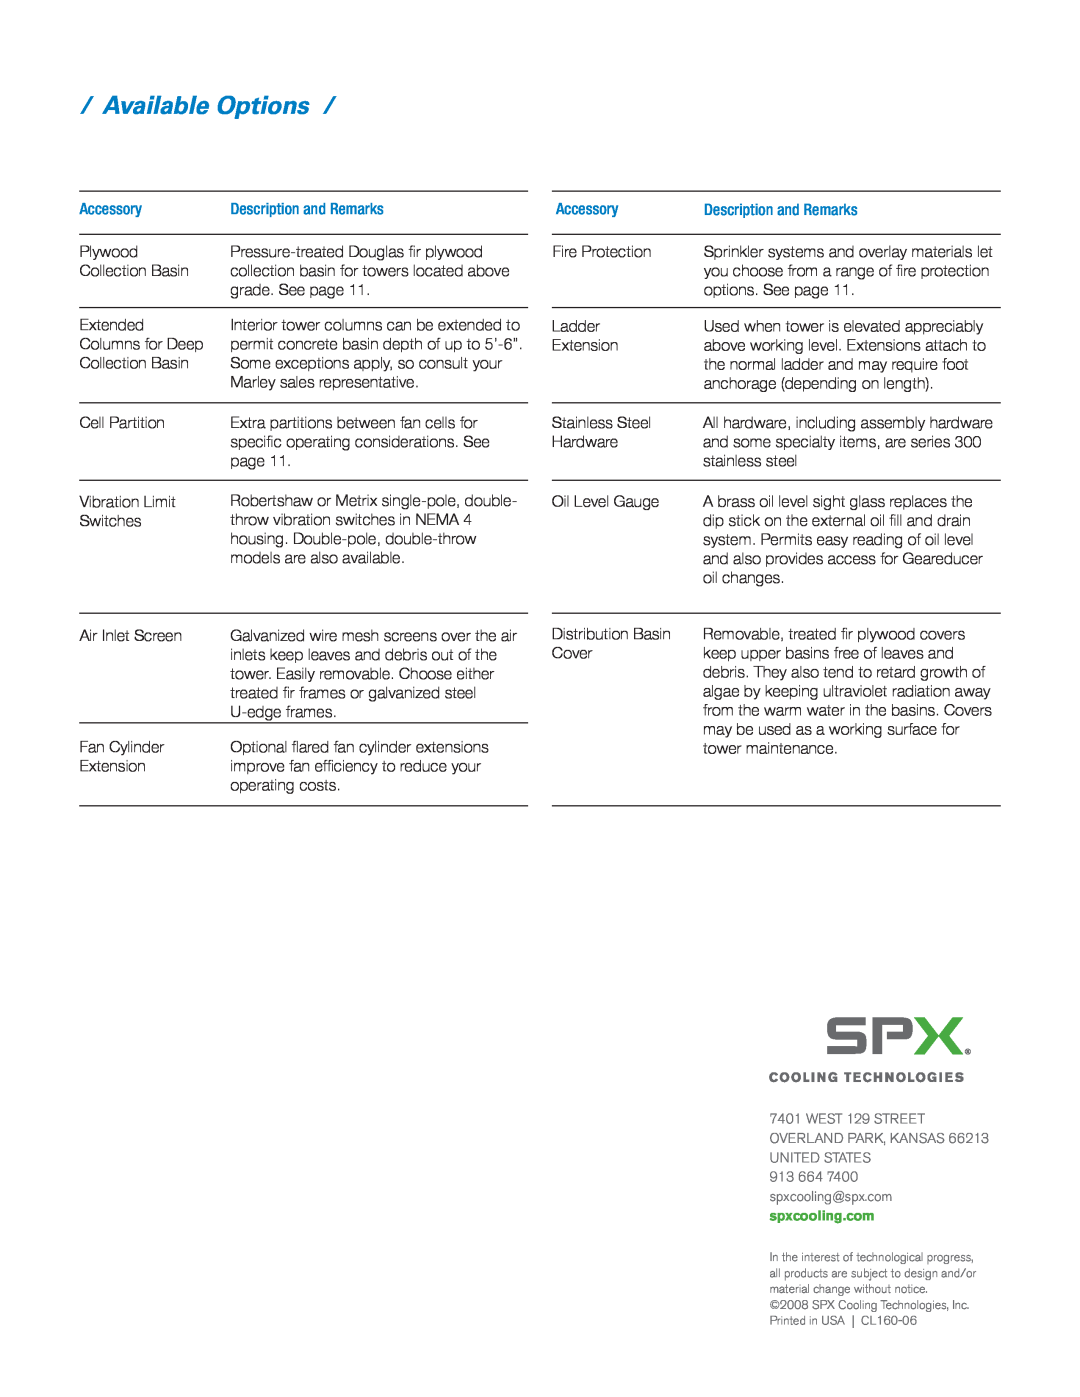 SPX Cooling Technologies 160 manual Available Options, Accessory, Description and Remarks 